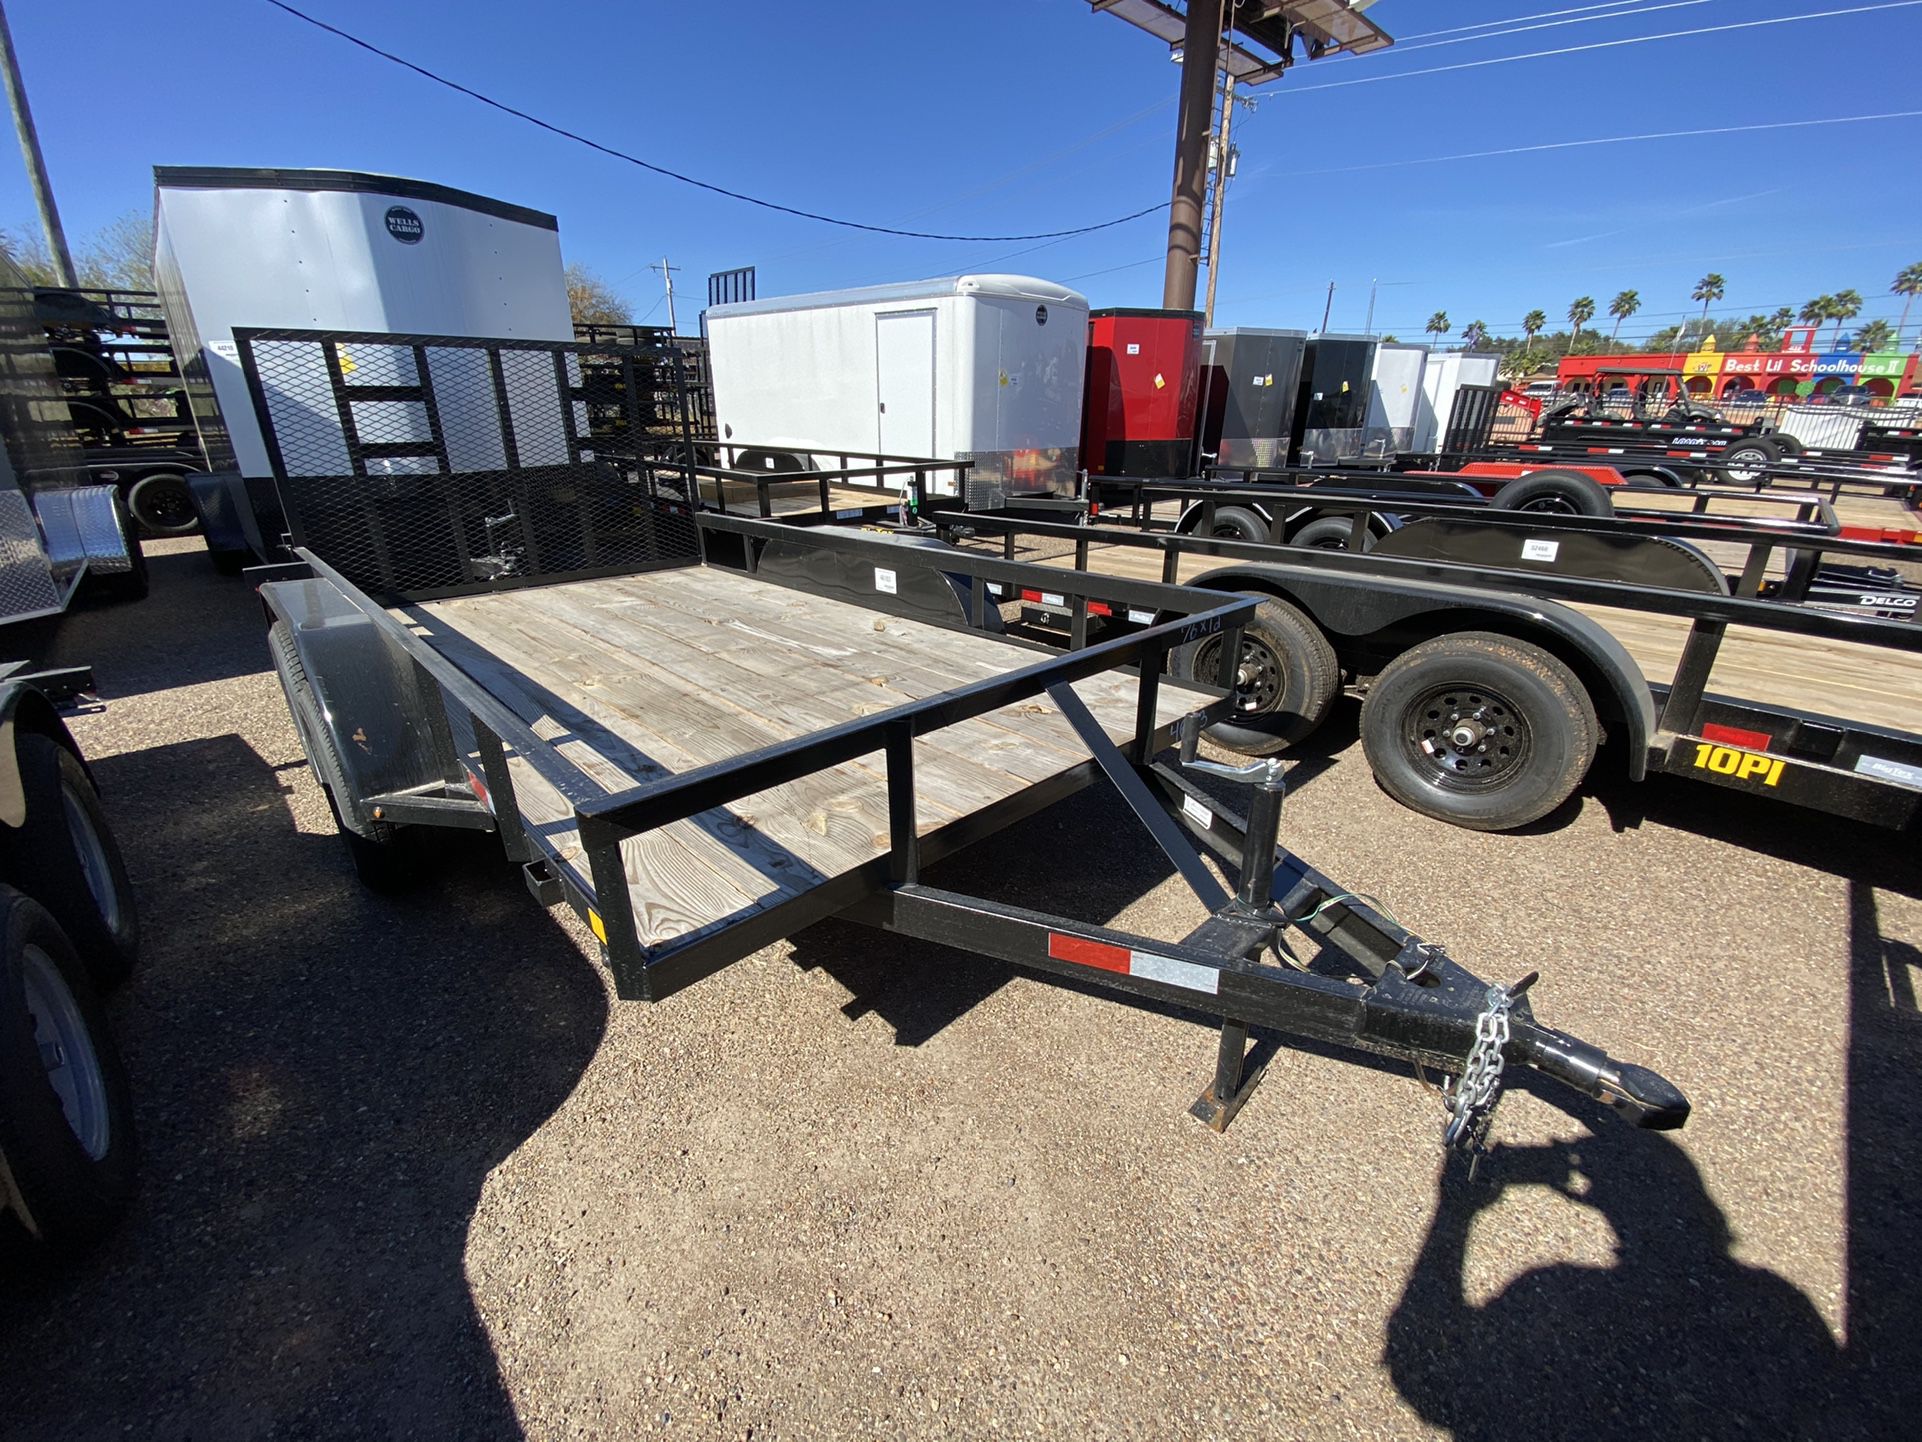 Utility trailers and car haulers